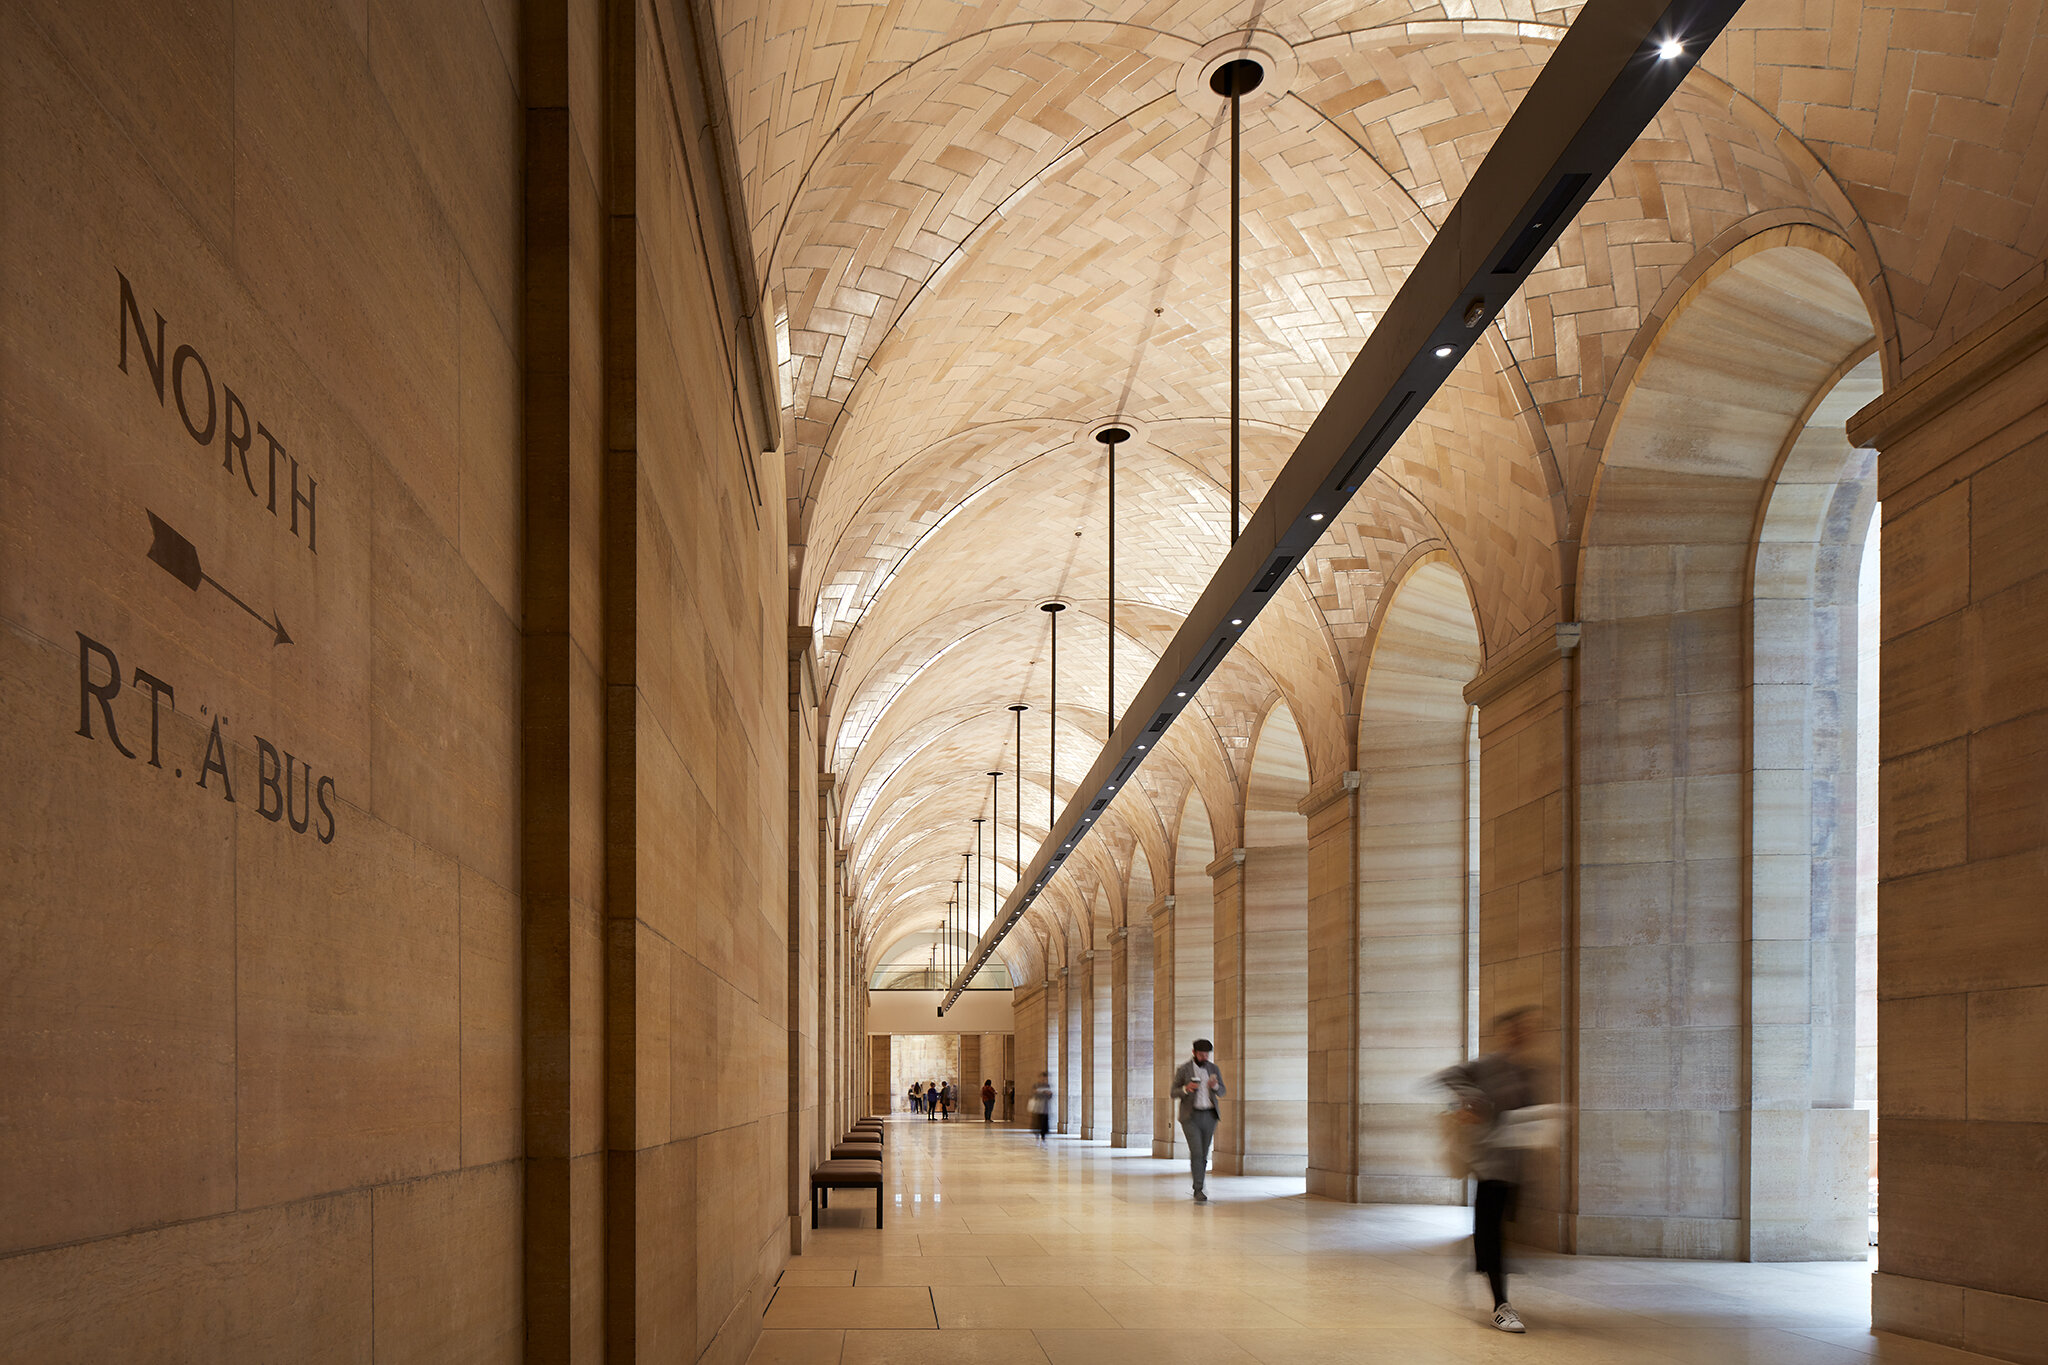  The Philadelphia Museum of Art  Renovation Architect: Frank Gehry Partners, LLP  Philadelphia, PA     View Full Project  